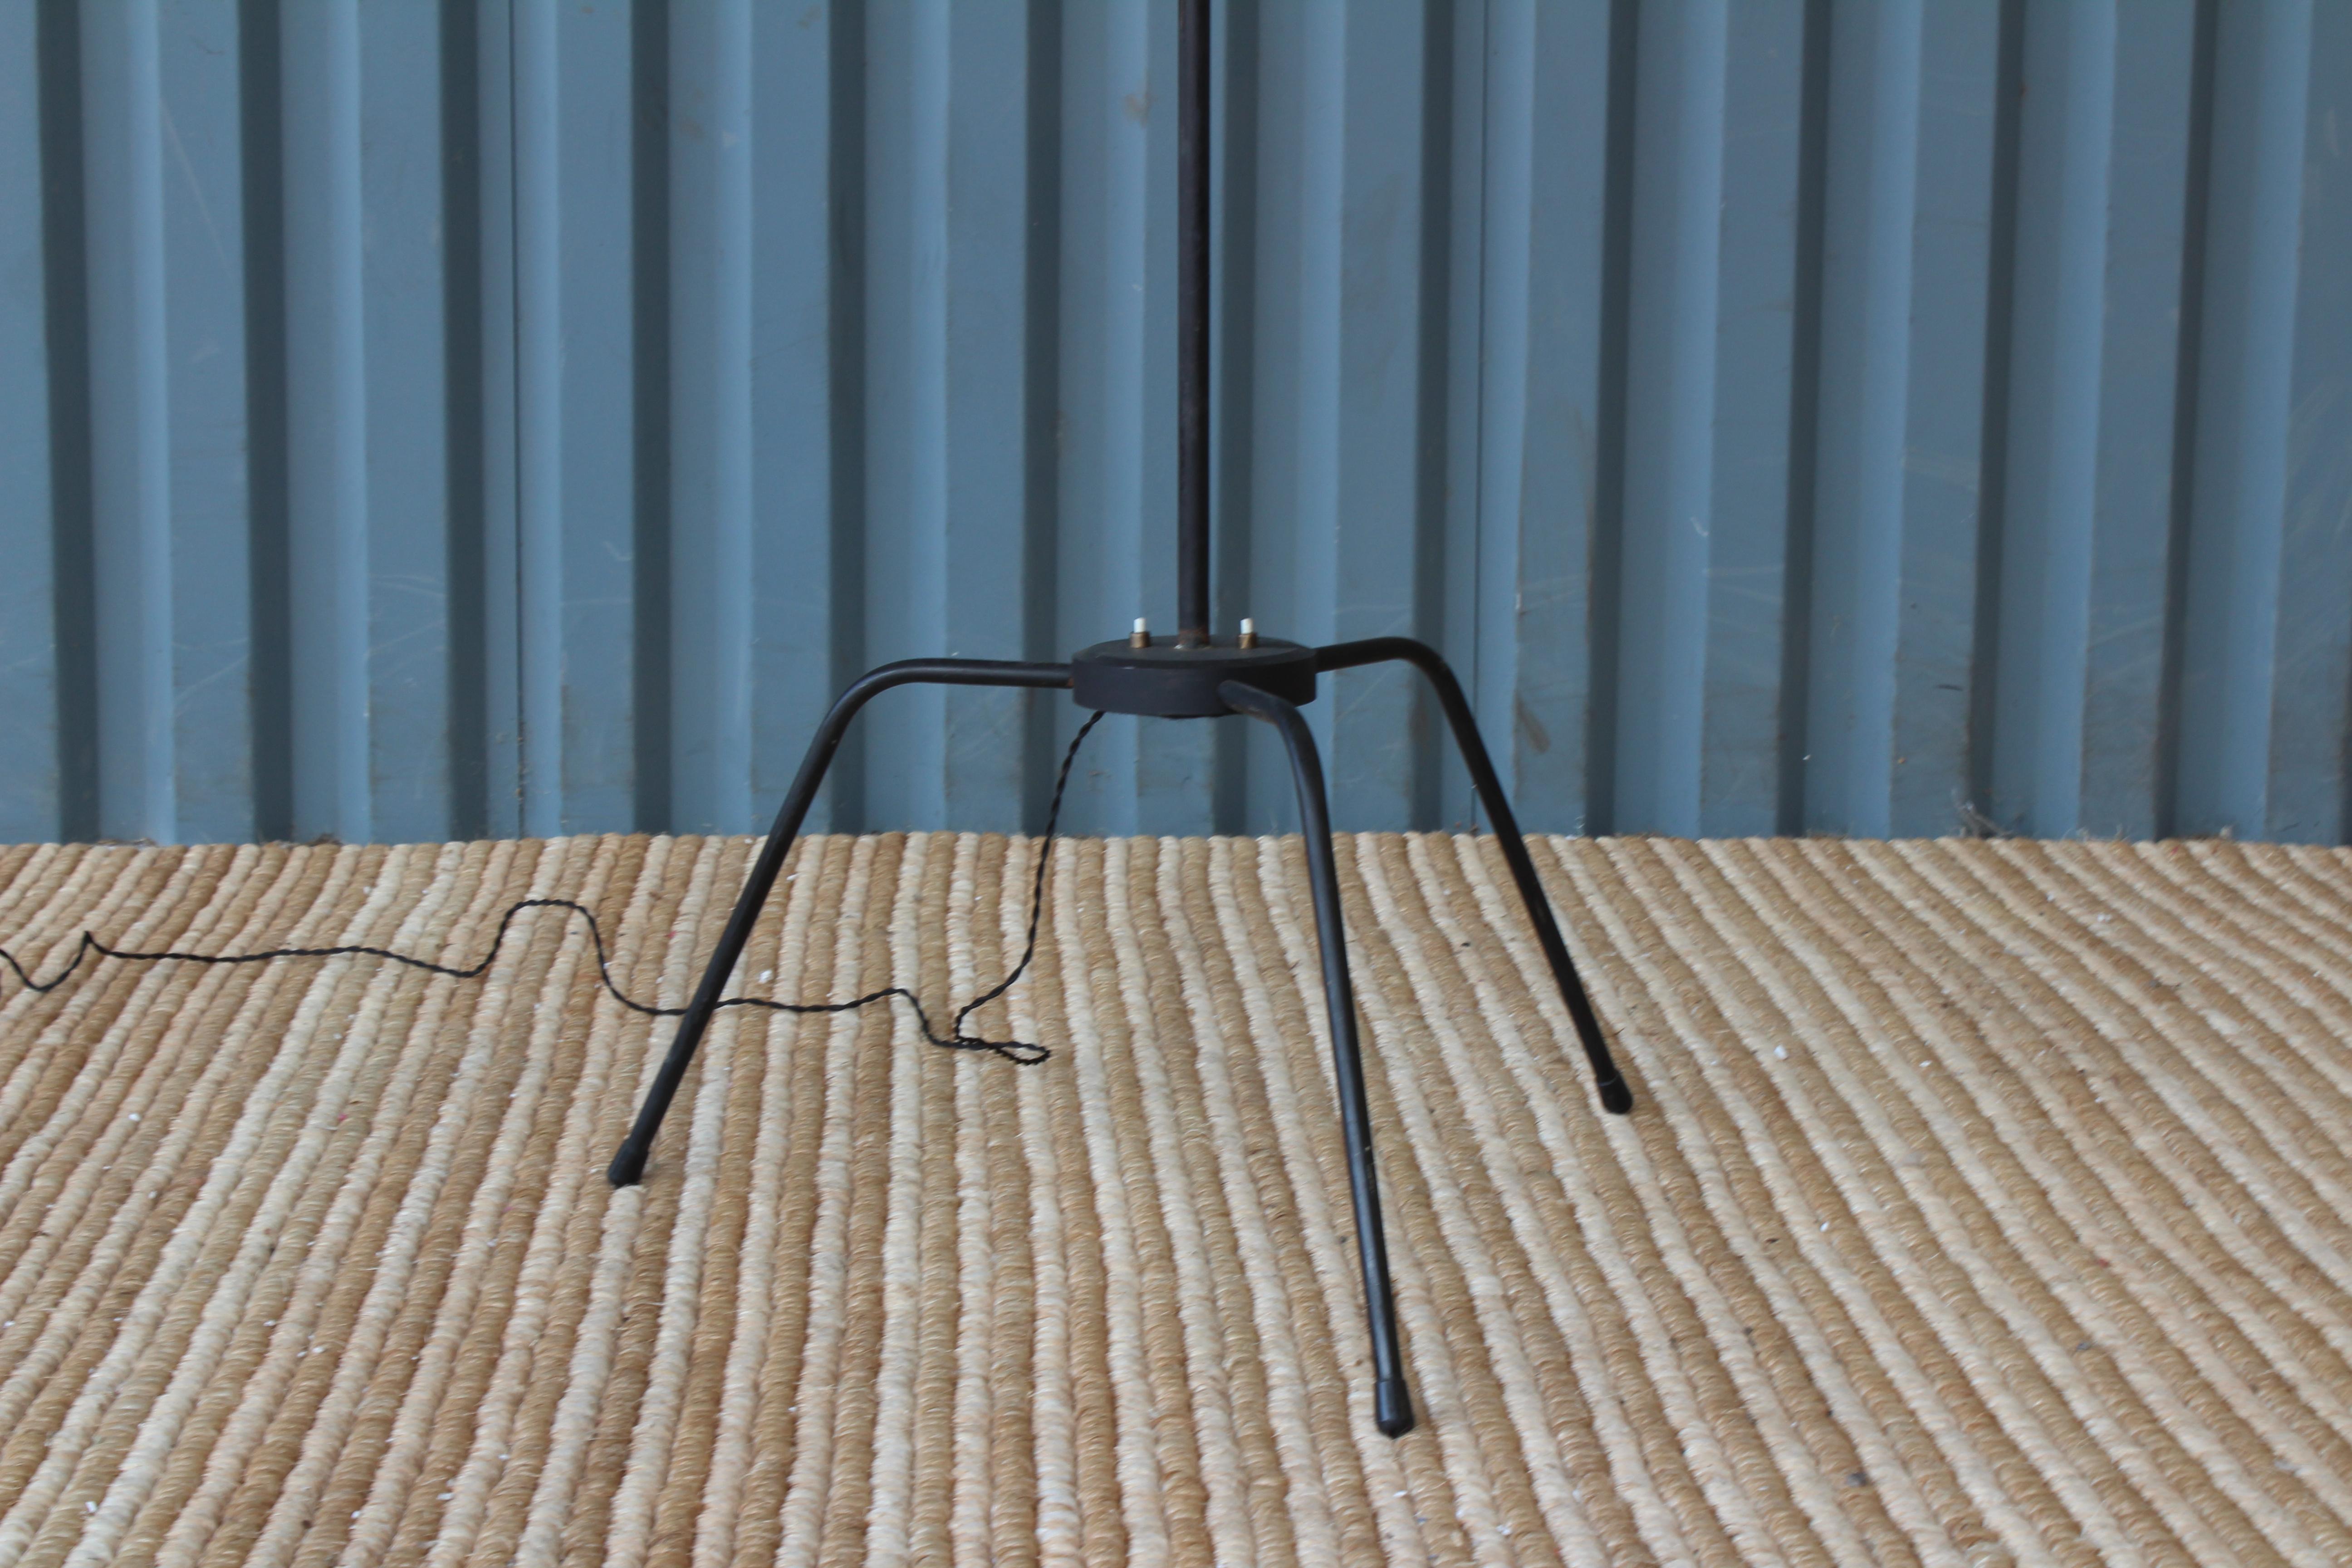 Unique French 1950s iron floor lamp. Pair available. They both have been rewired and feature custom fitted linen shades with black edged details.